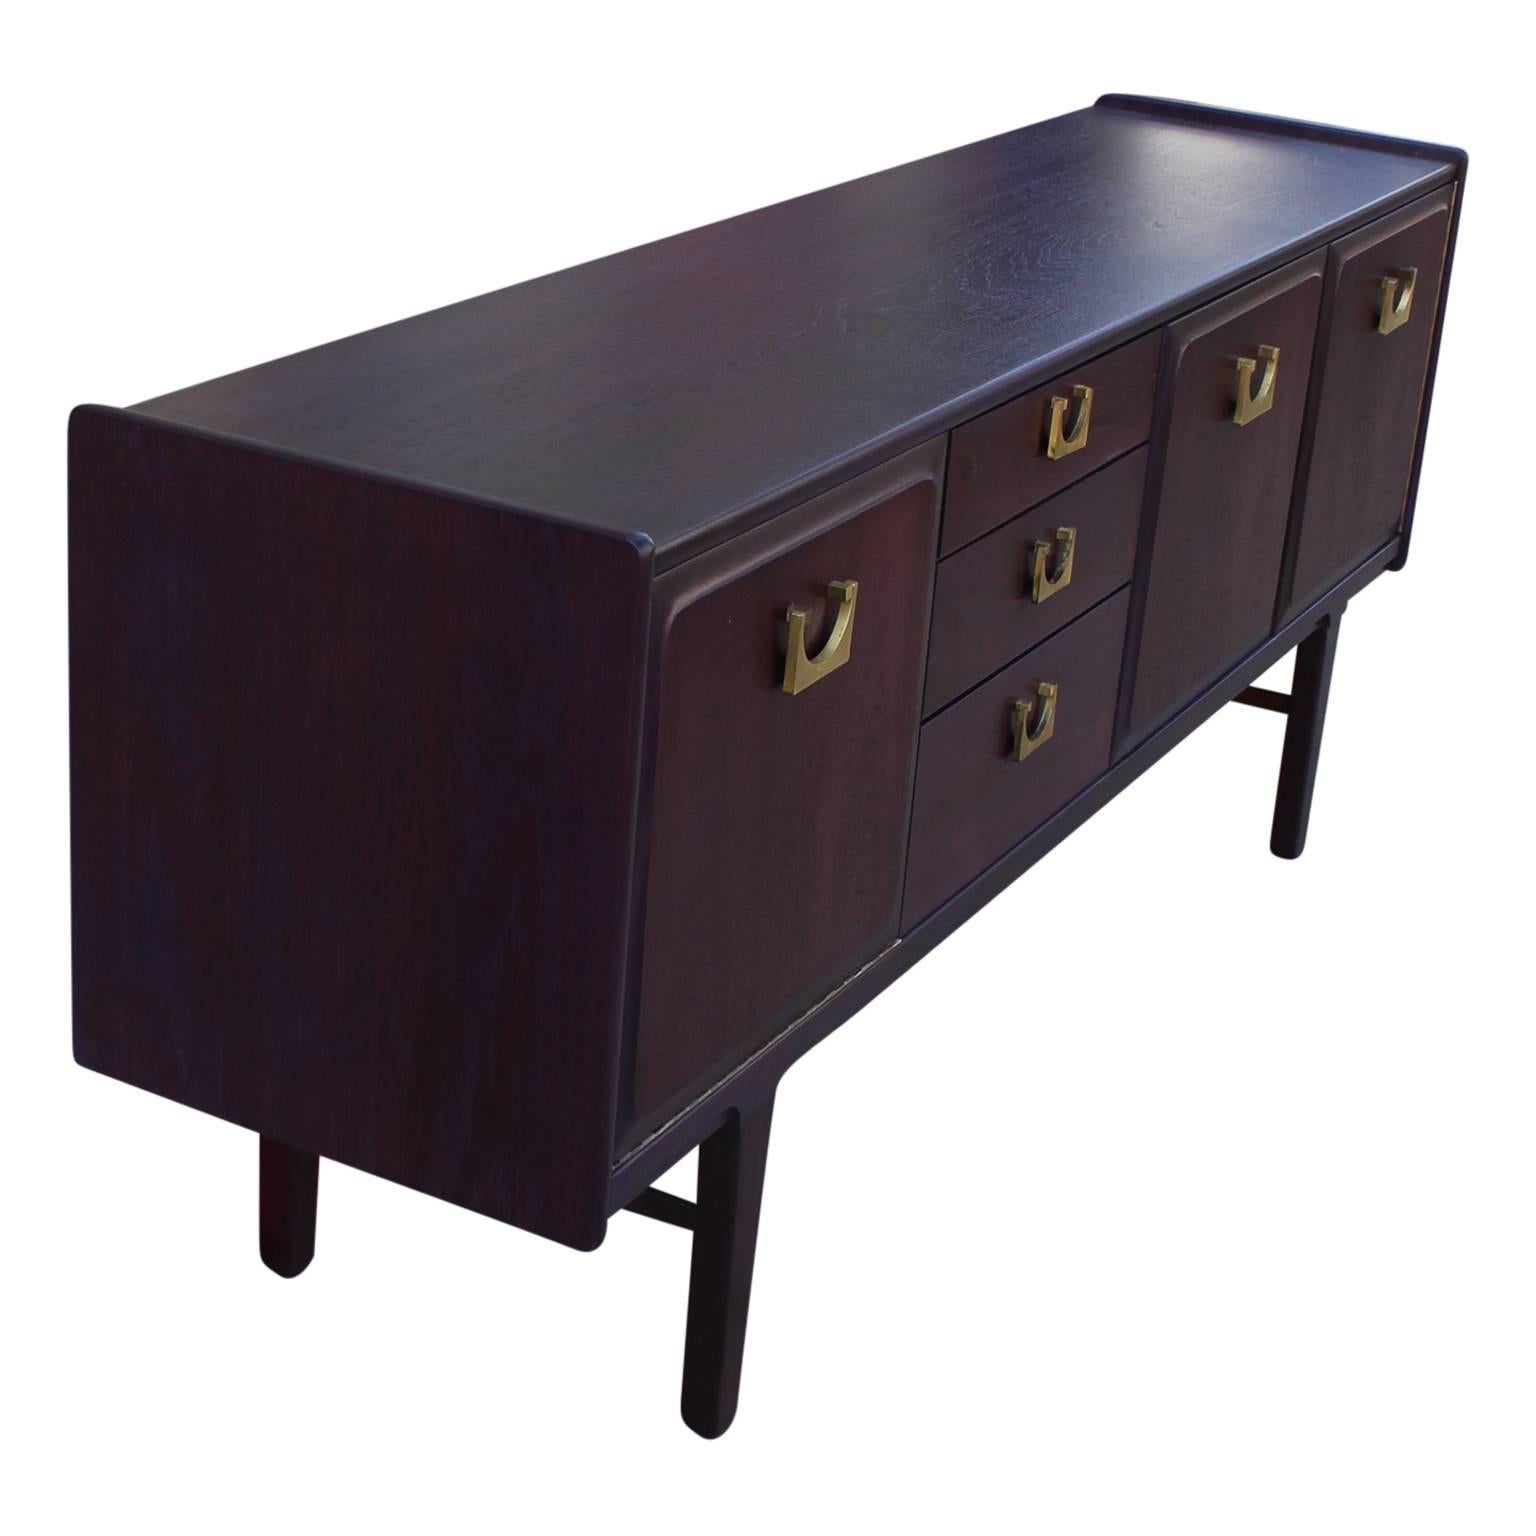 Excellent teak sideboard / credenza with brass hardware aniline dyed in a deep violet purple. The credenza features 3 doors with ample storage and three drawers to left left center. The hardware is bold and tops off the great look. The construction